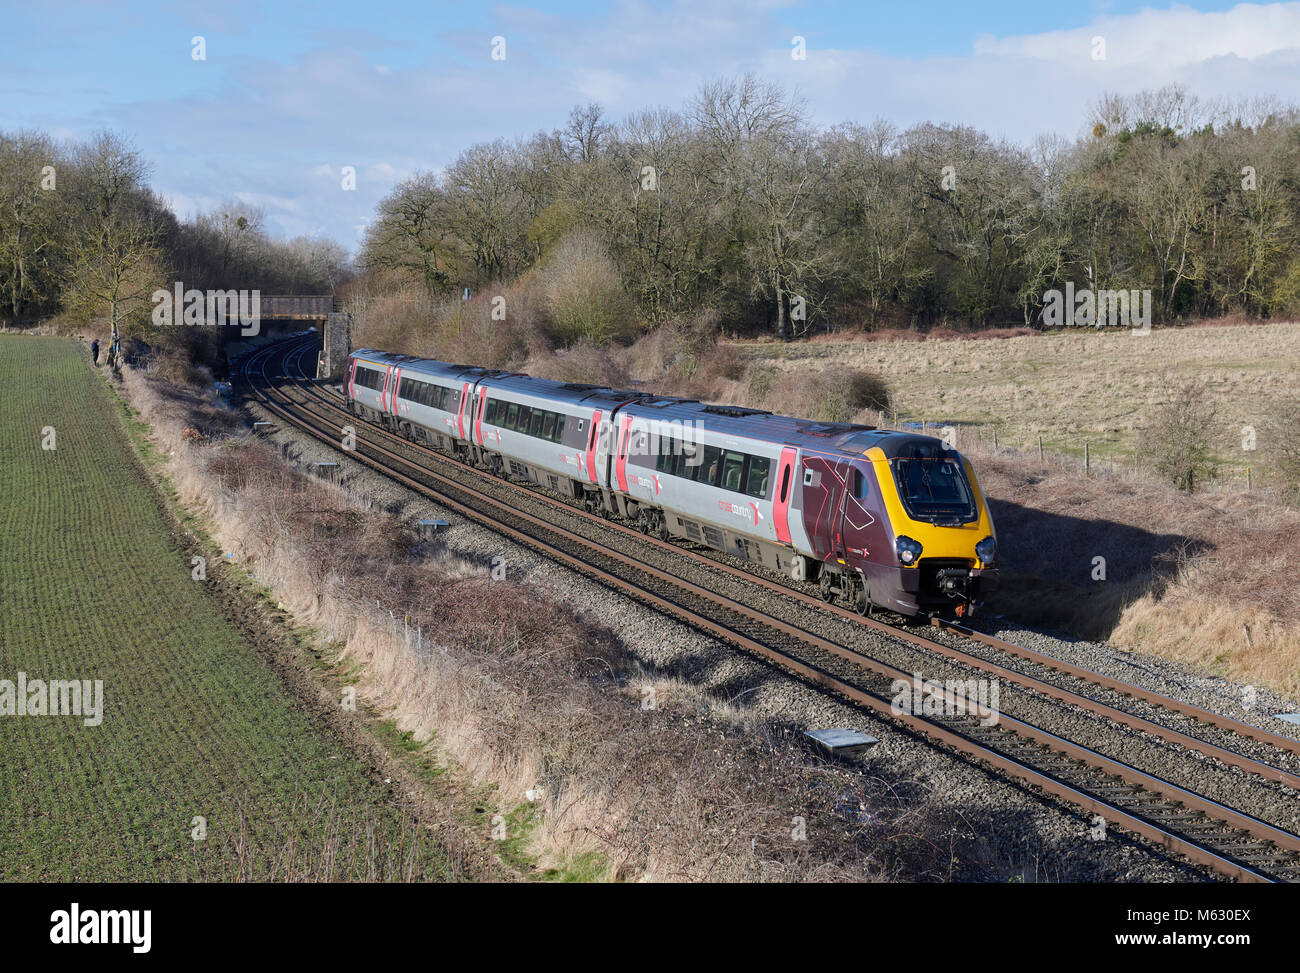 Cross Country Trains 220021 heads through Croome, Worcestershire with the 1V57 1307 Manchester Piccadilly to Bristol Temple Meads service on 27th Feb  Stock Photo